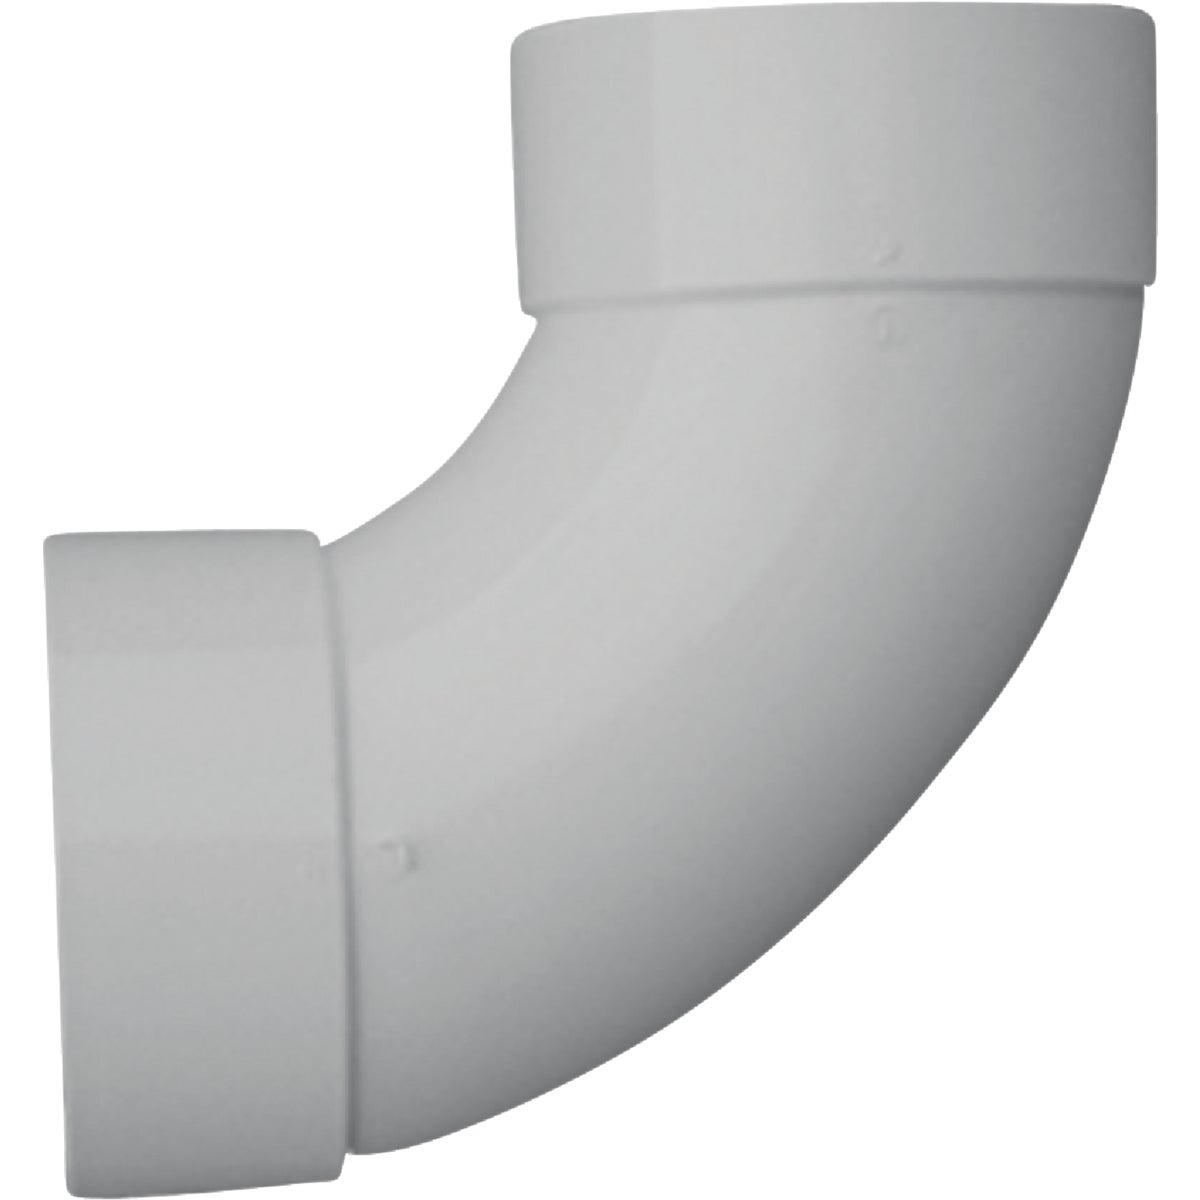 IPEX Canplas 6 In. SDR 35 90 Deg. PVC Sewer and Drain Sanitary Elbow (1/4 Bend)